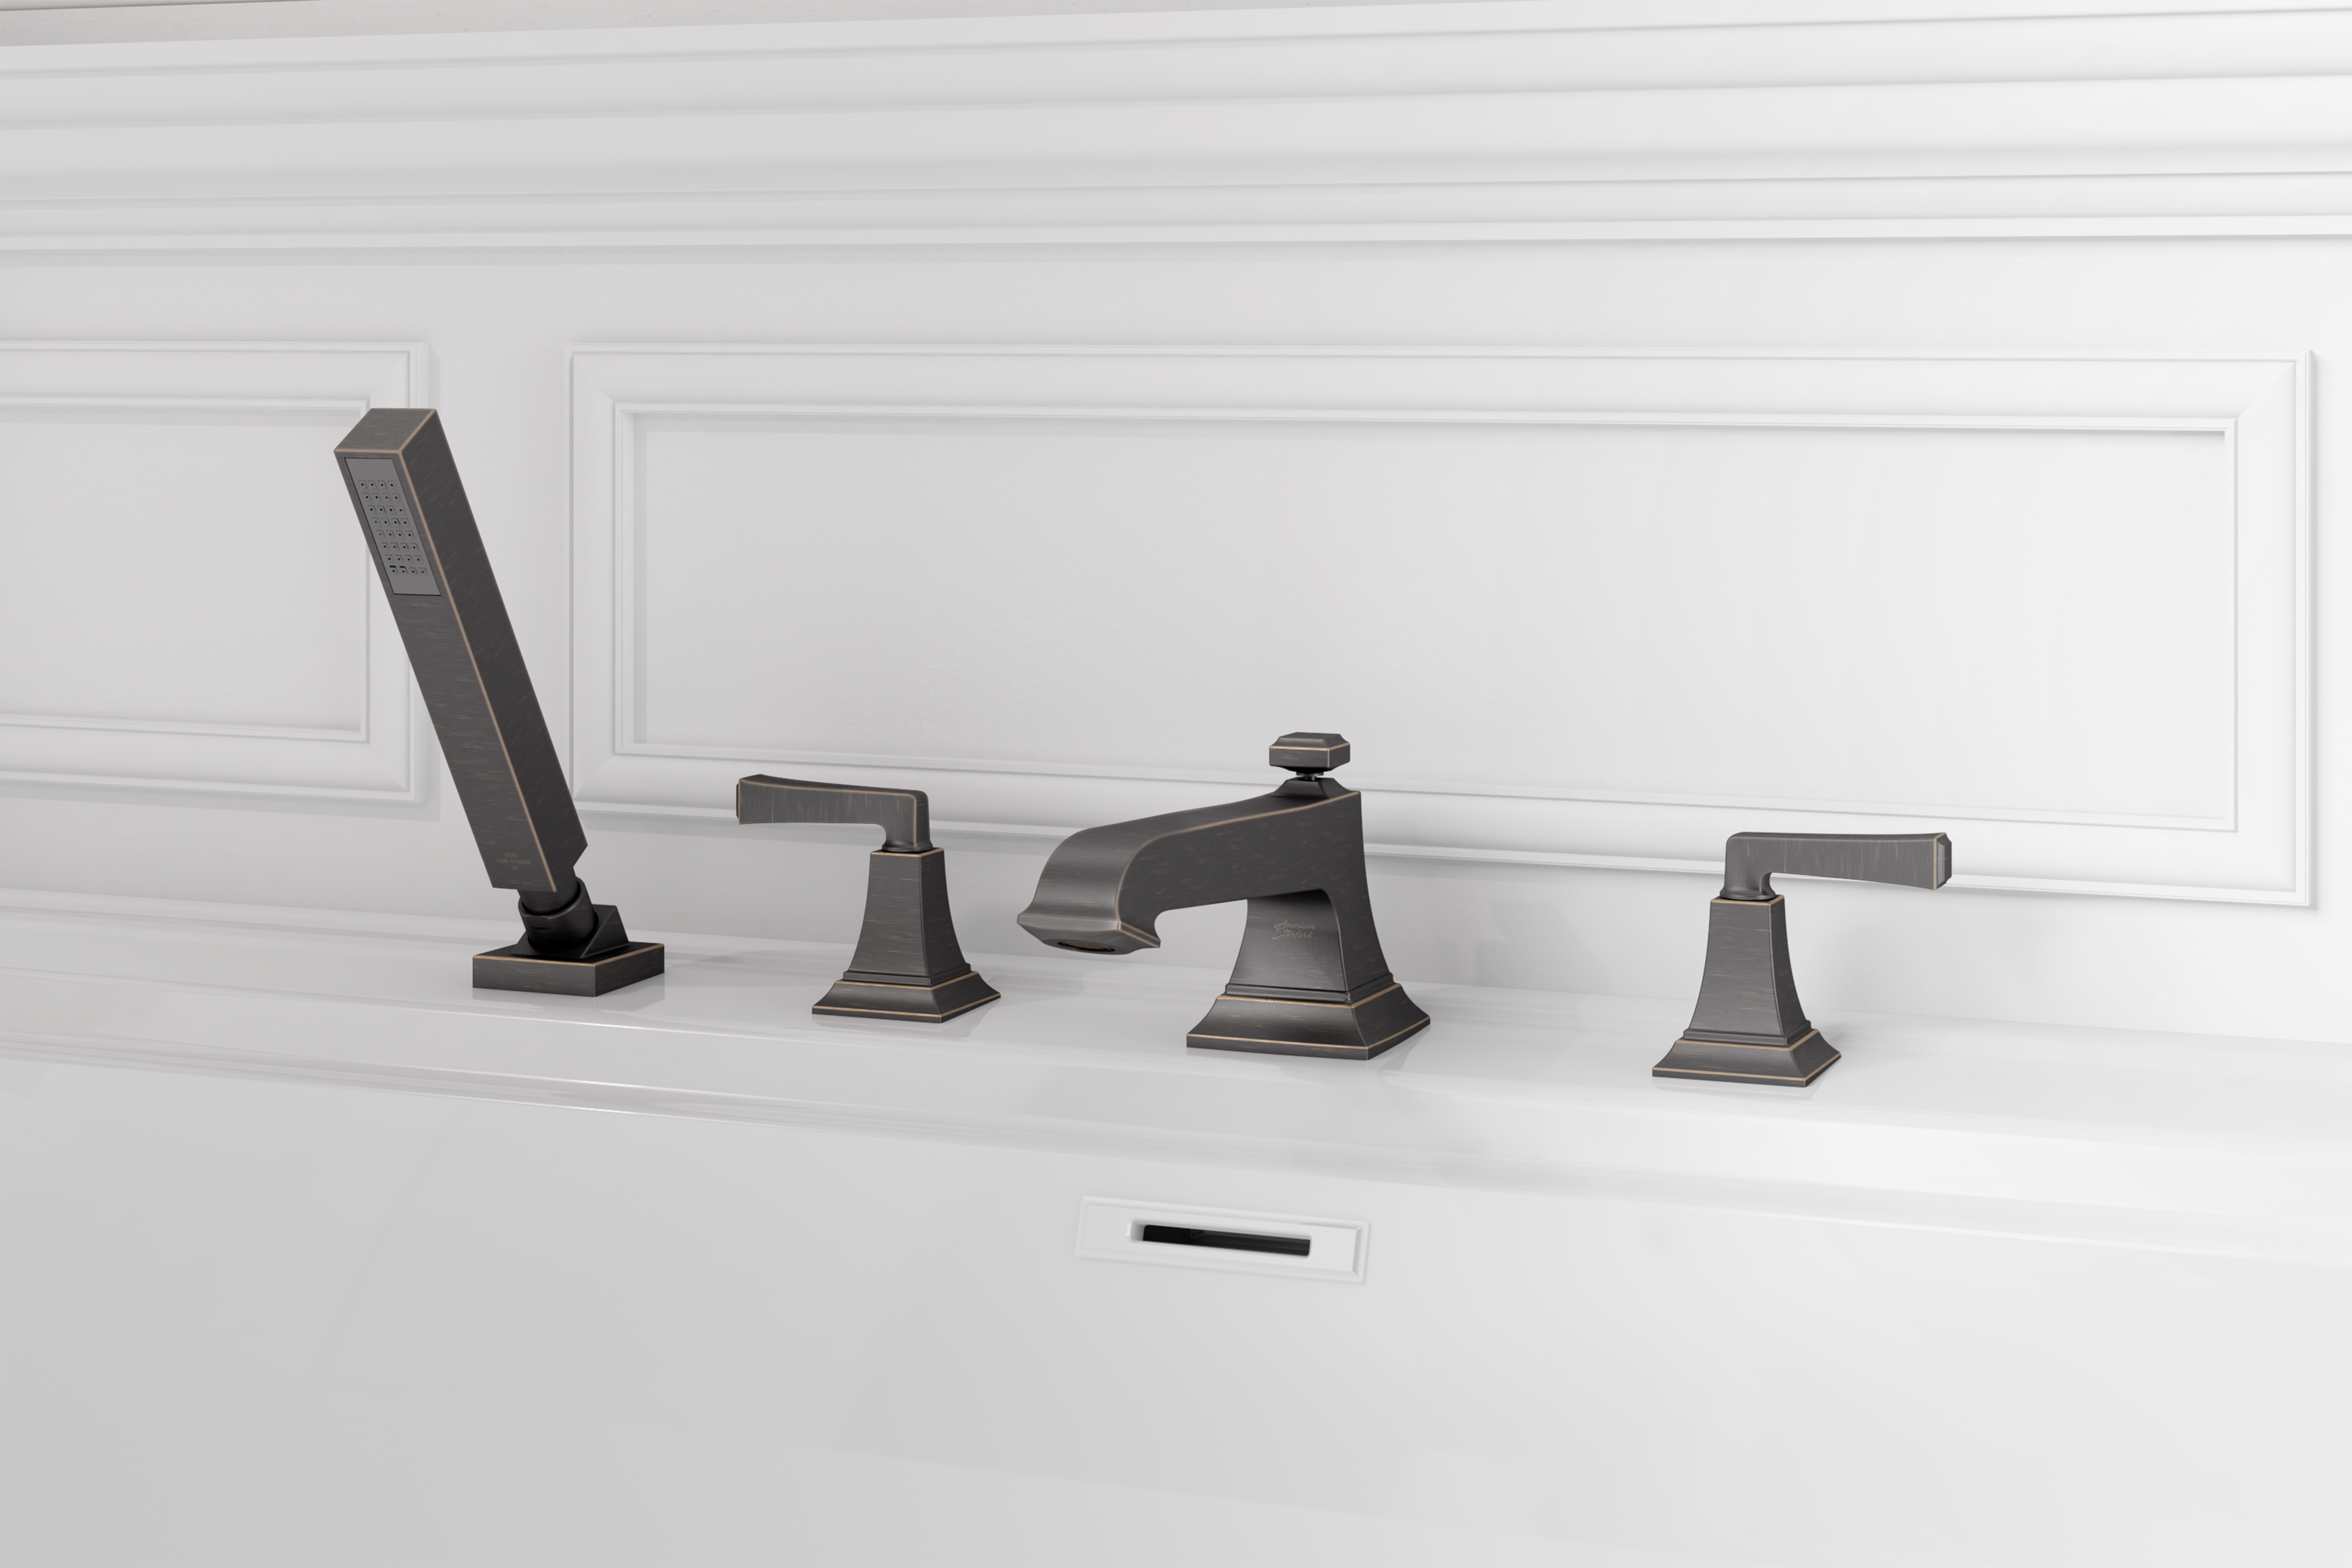 Town Square® S Bathub Faucet With Lever Handles and Personal Shower for Flash® Rough-in Valve